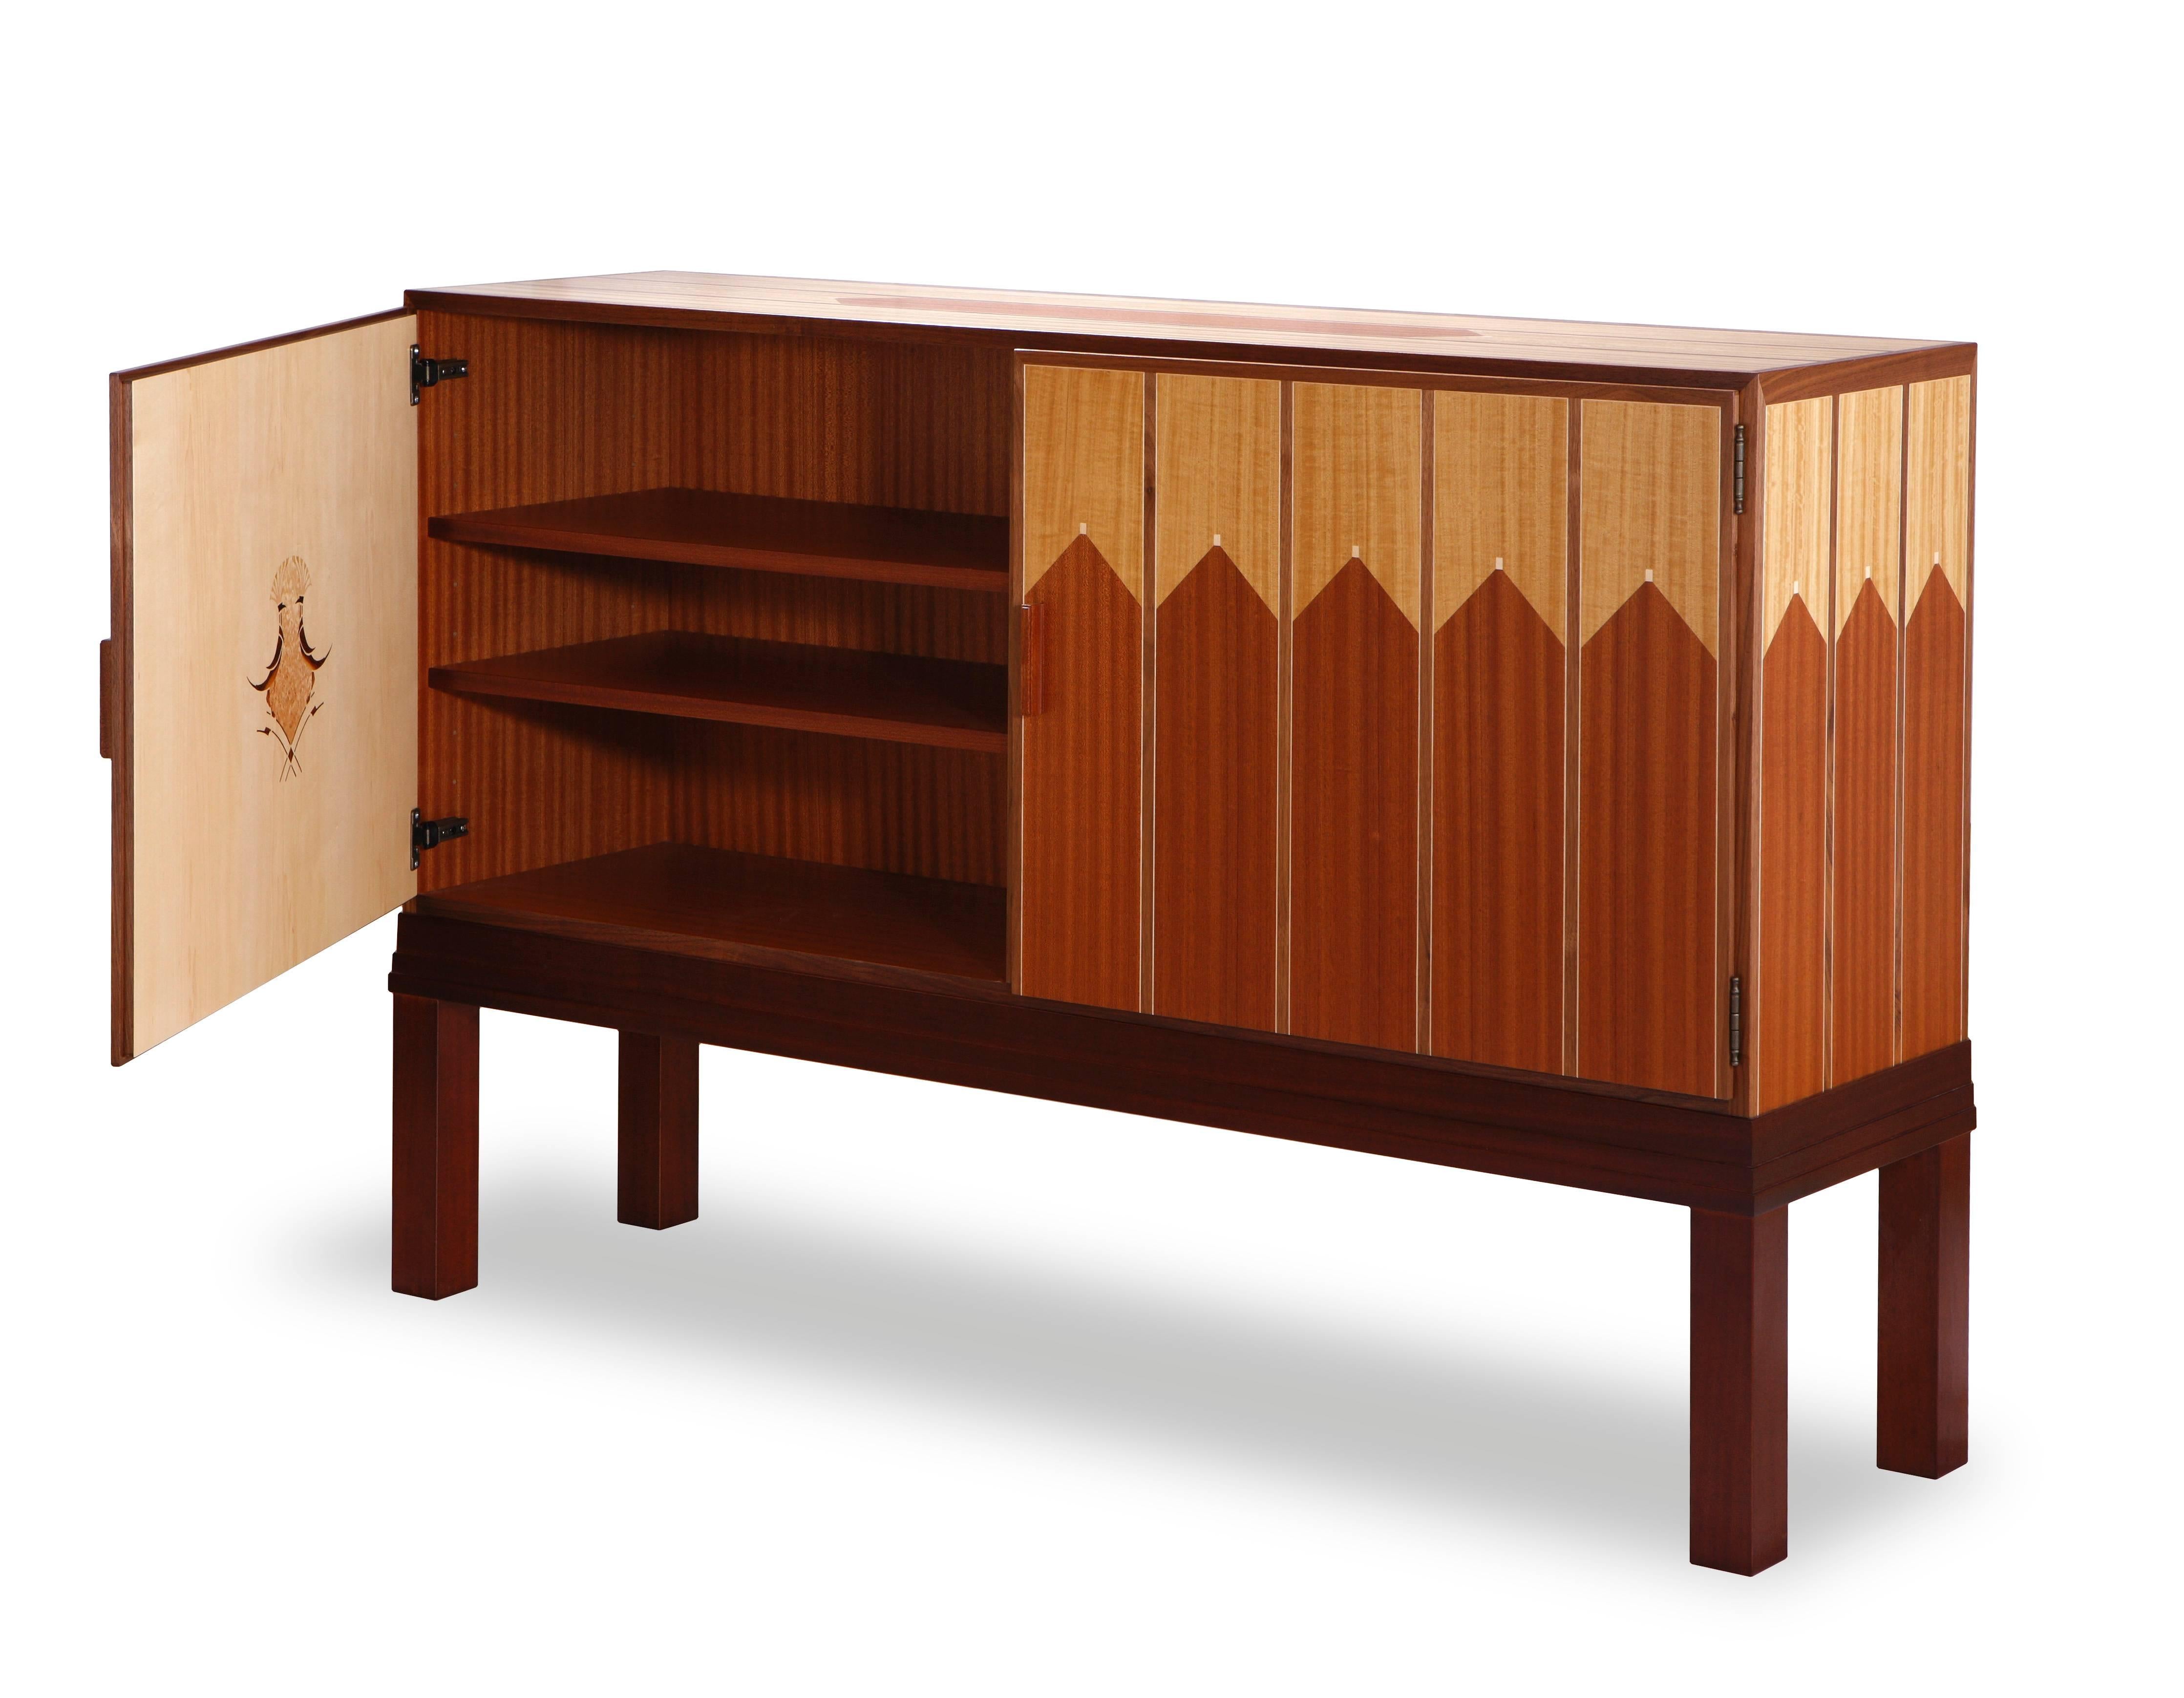 The Saarinen house credenza is part of Saarinen suite that represents one design of various suites of living room furniture in Saarinen’s Cranbrook home. The inlaid ornamentation with rhythmic pattern and the suite’s restrained elegance are unique